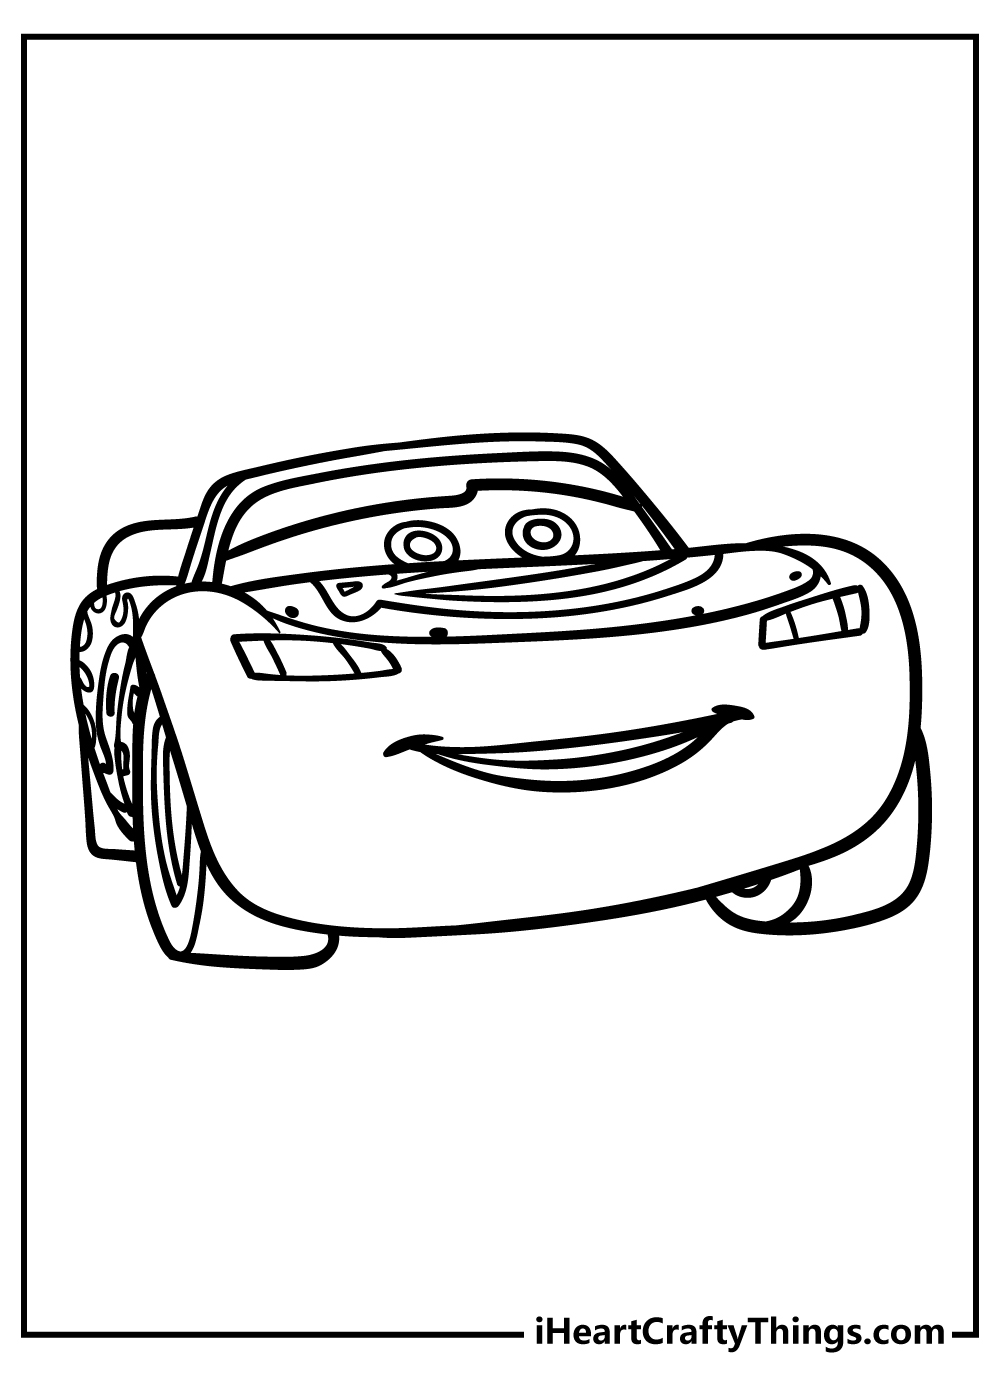 Lightning McQueen Coloring Pages for preschoolers free printable